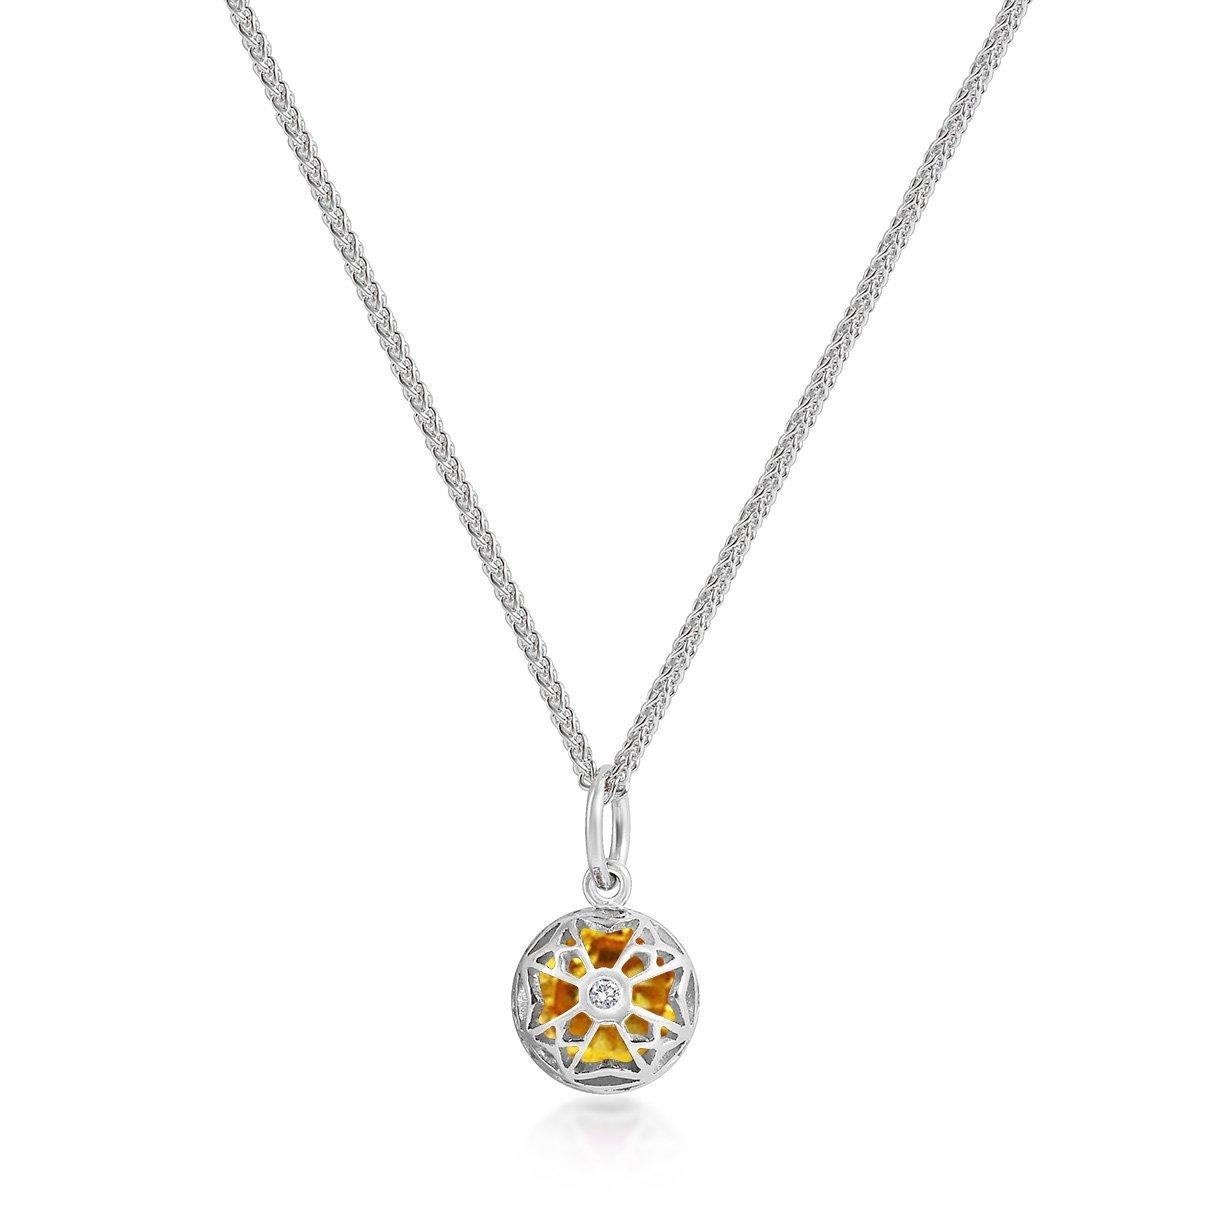 Handcrafted 1.50 Carats Yellow Sapphire 18 Karat White Gold Pendant Necklace. The 7mm natural stone is set in our iconic hand pierced gold lace to let the light through. Our pendants are the ideal gift. 

Here presented on our finely knitted gold